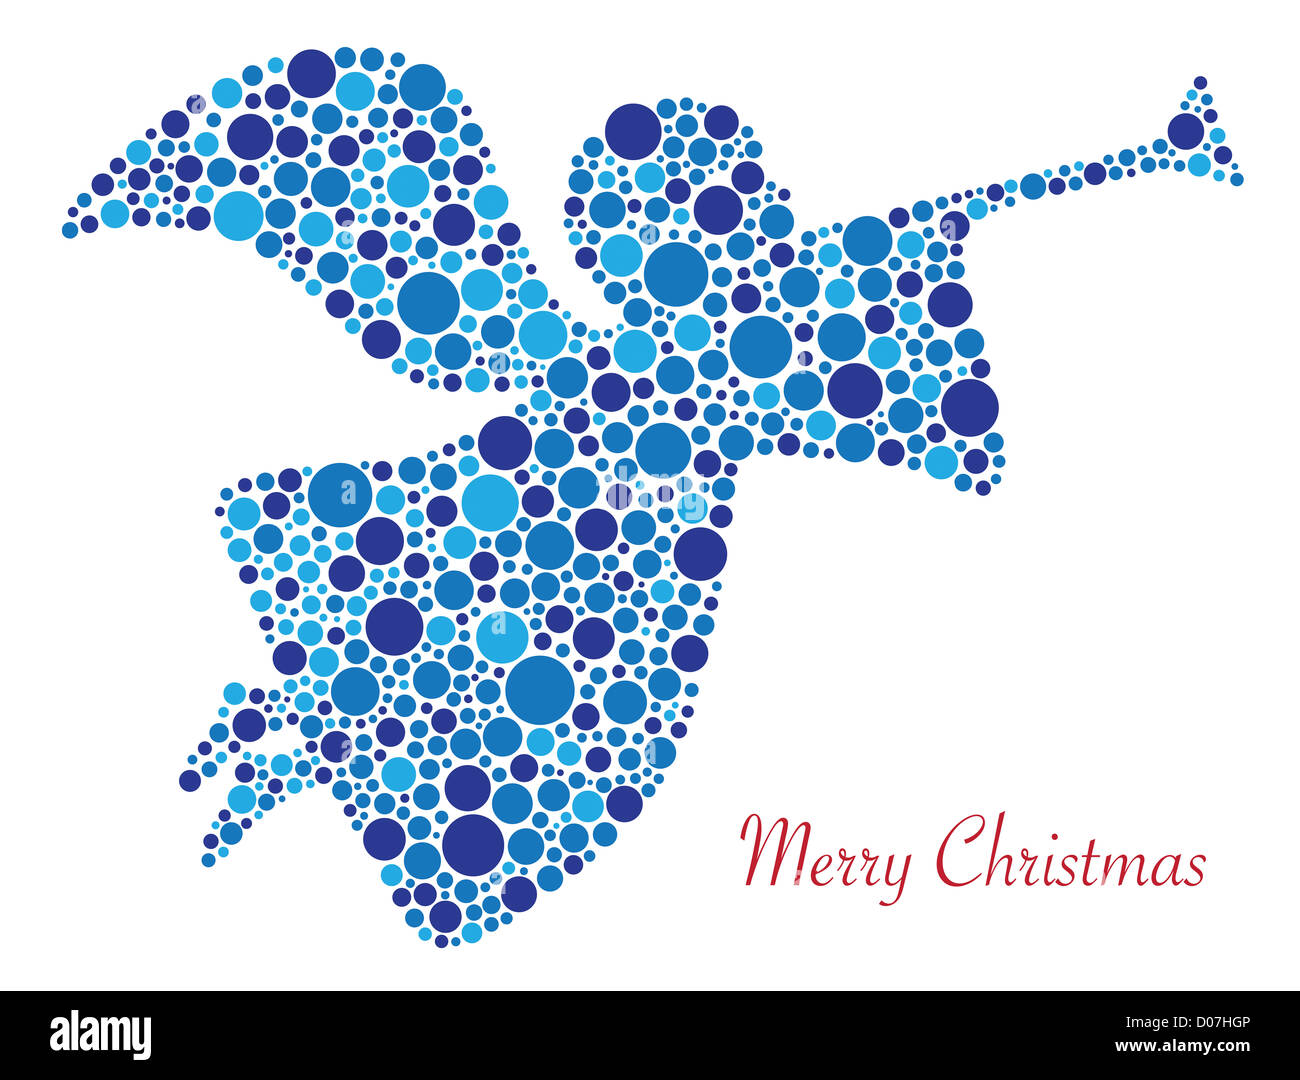 Christmas Angel Trumpet Silhouette in Polka Dots with Merry Christmas Text Illustration Stock Photo